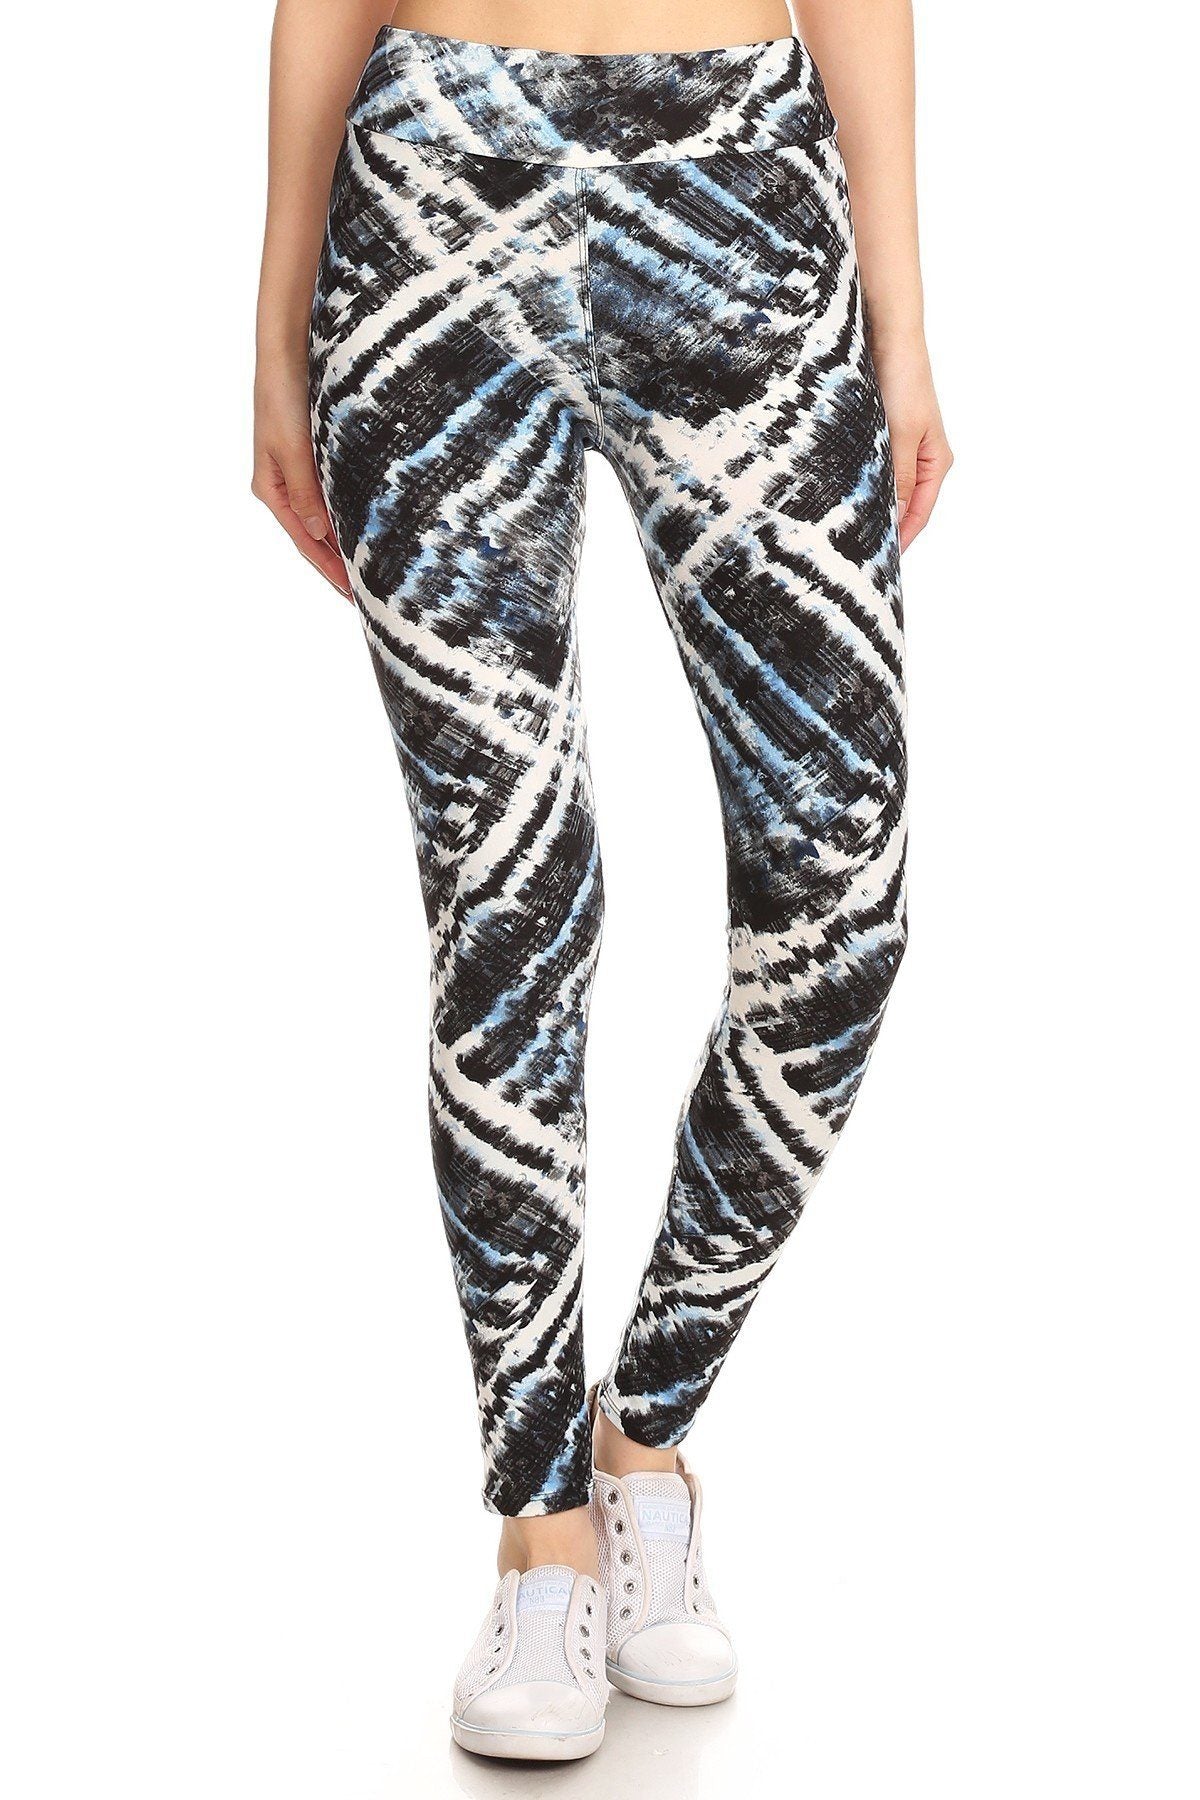 Yoga Style Banded Lined Tie Dye Printed Knit Legging With High Waist king-general-store-5710.myshopify.com